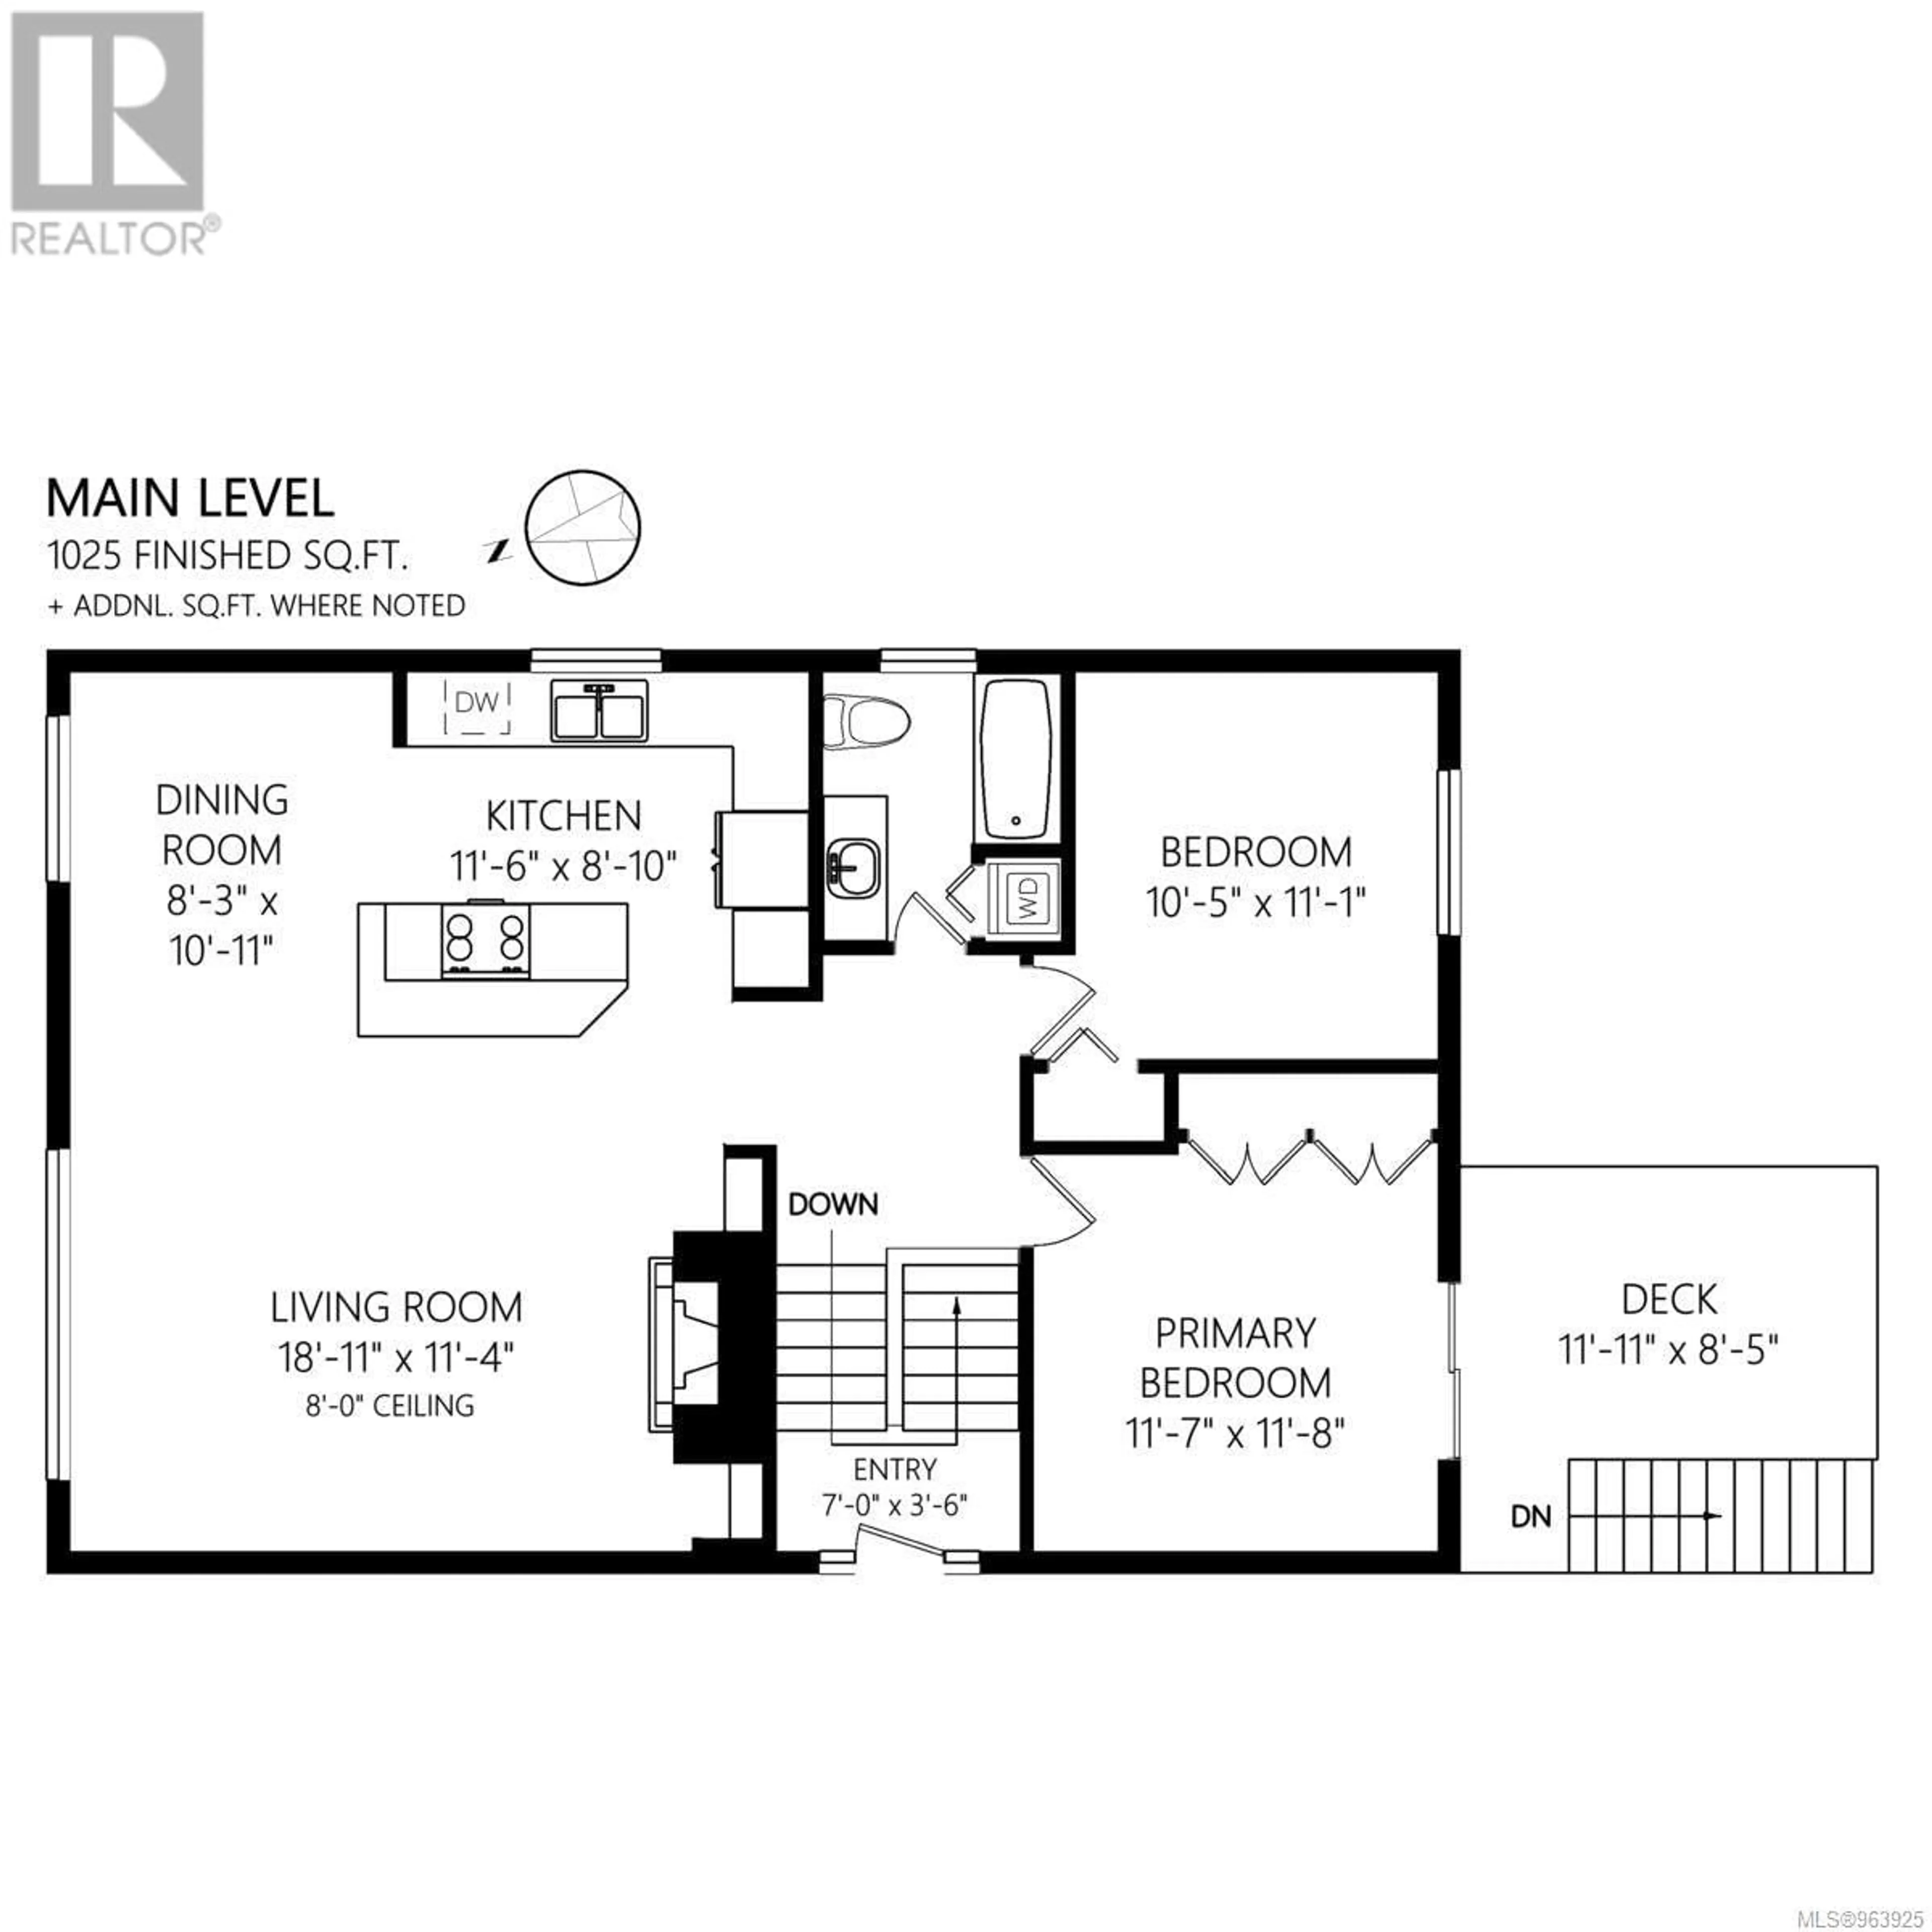 Floor plan for 2357 Malaview Ave, Sidney British Columbia V8L2G1